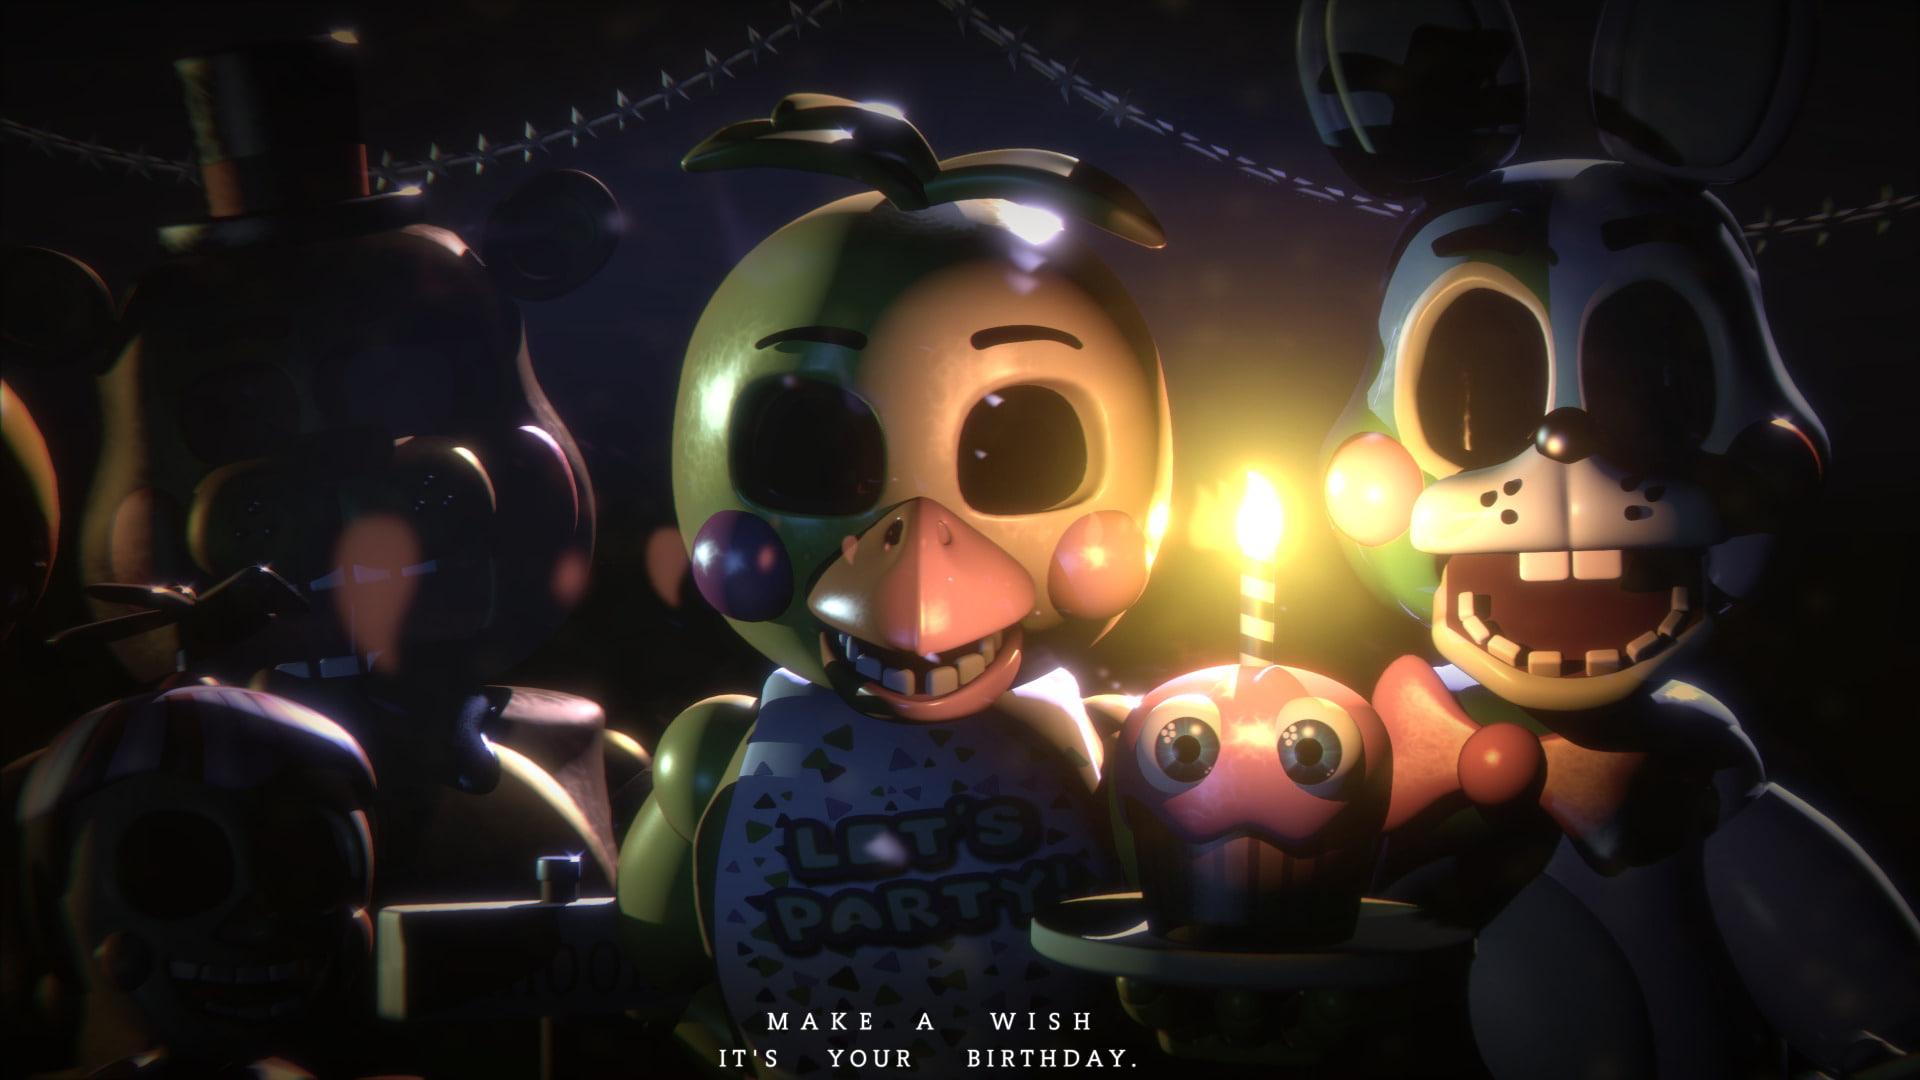 Five Nights At Freddy's 2 Wallpapers - Wallpaper Cave